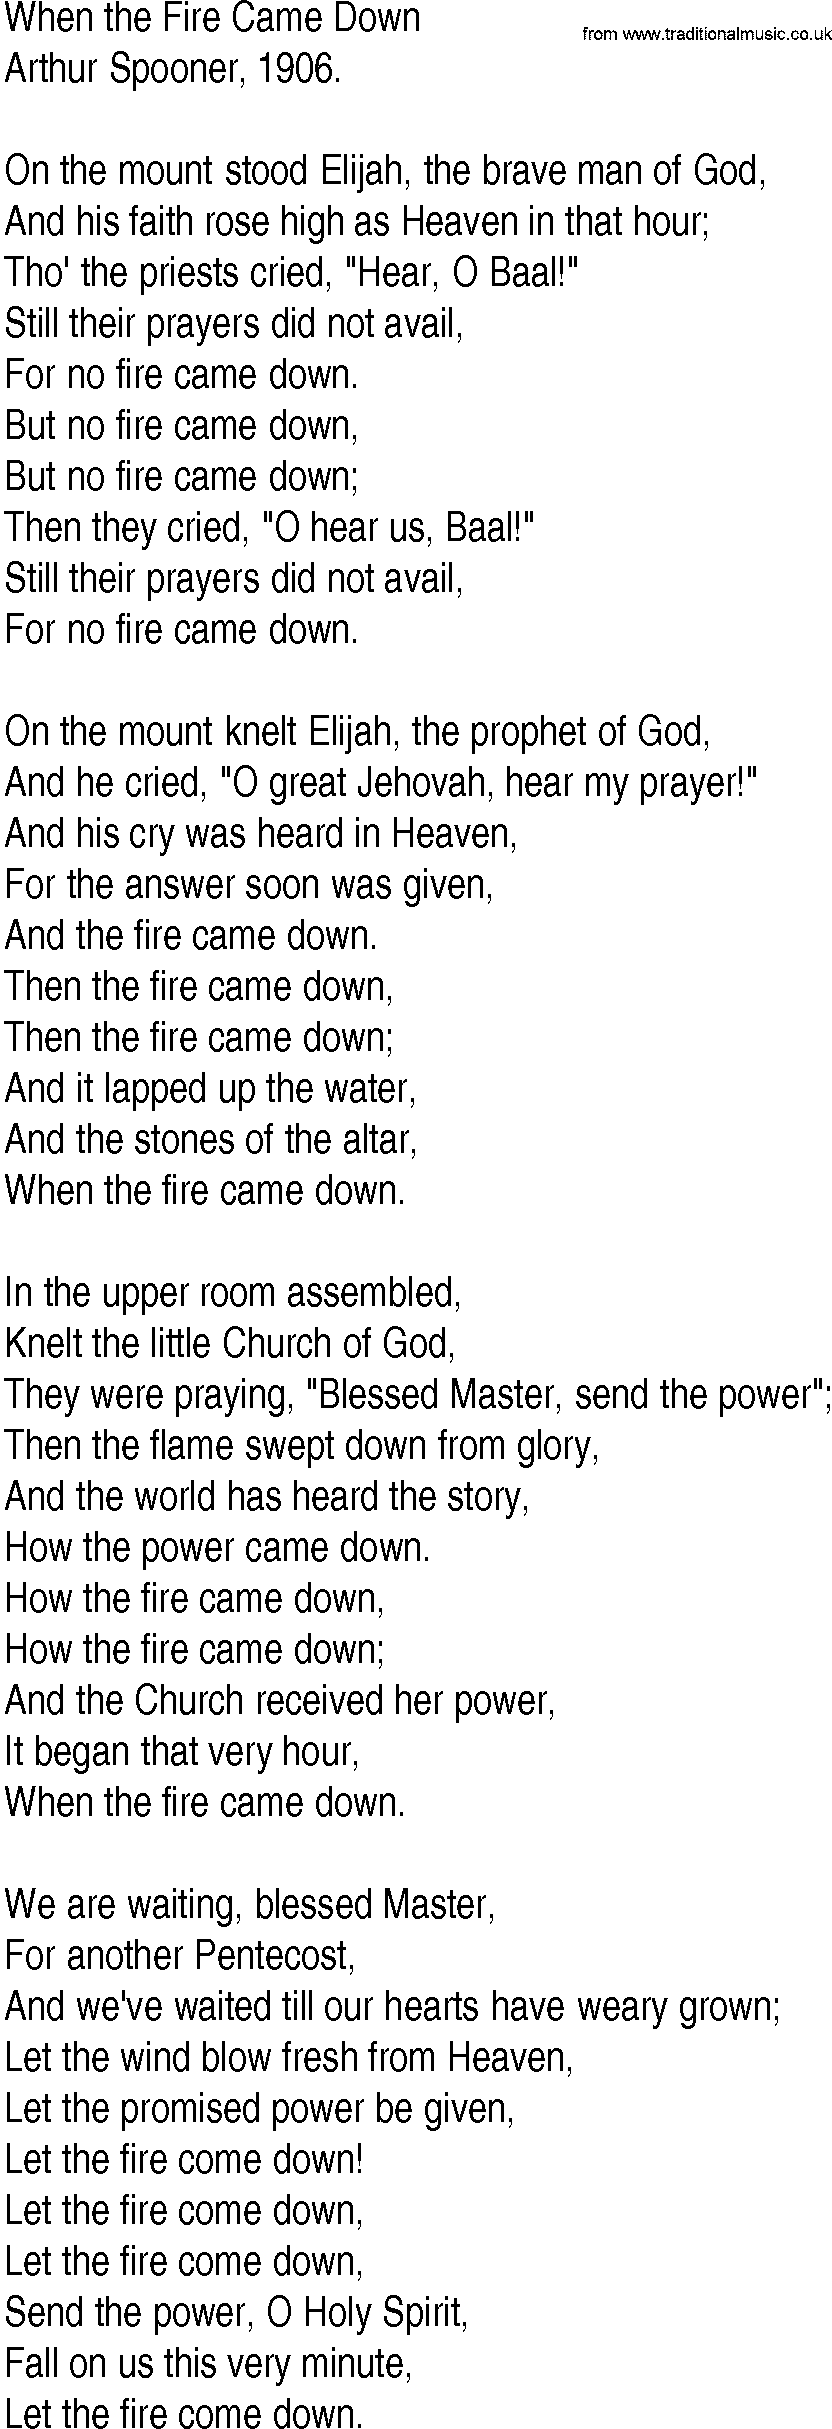 Hymn and Gospel Song: When the Fire Came Down by Arthur Spooner lyrics